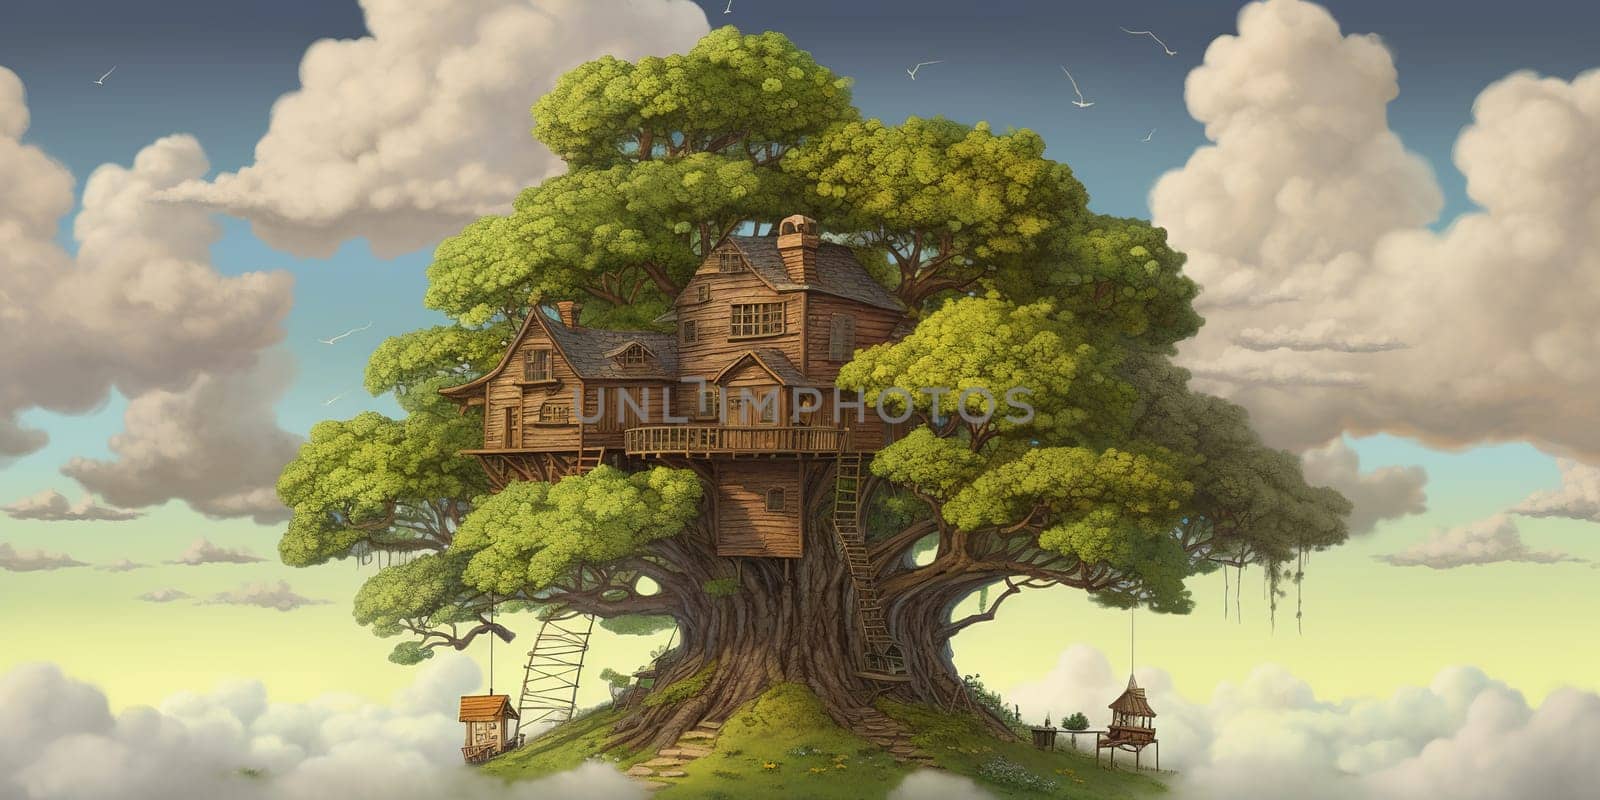 Huge fantasy tree with houses in its crown by tan4ikk1